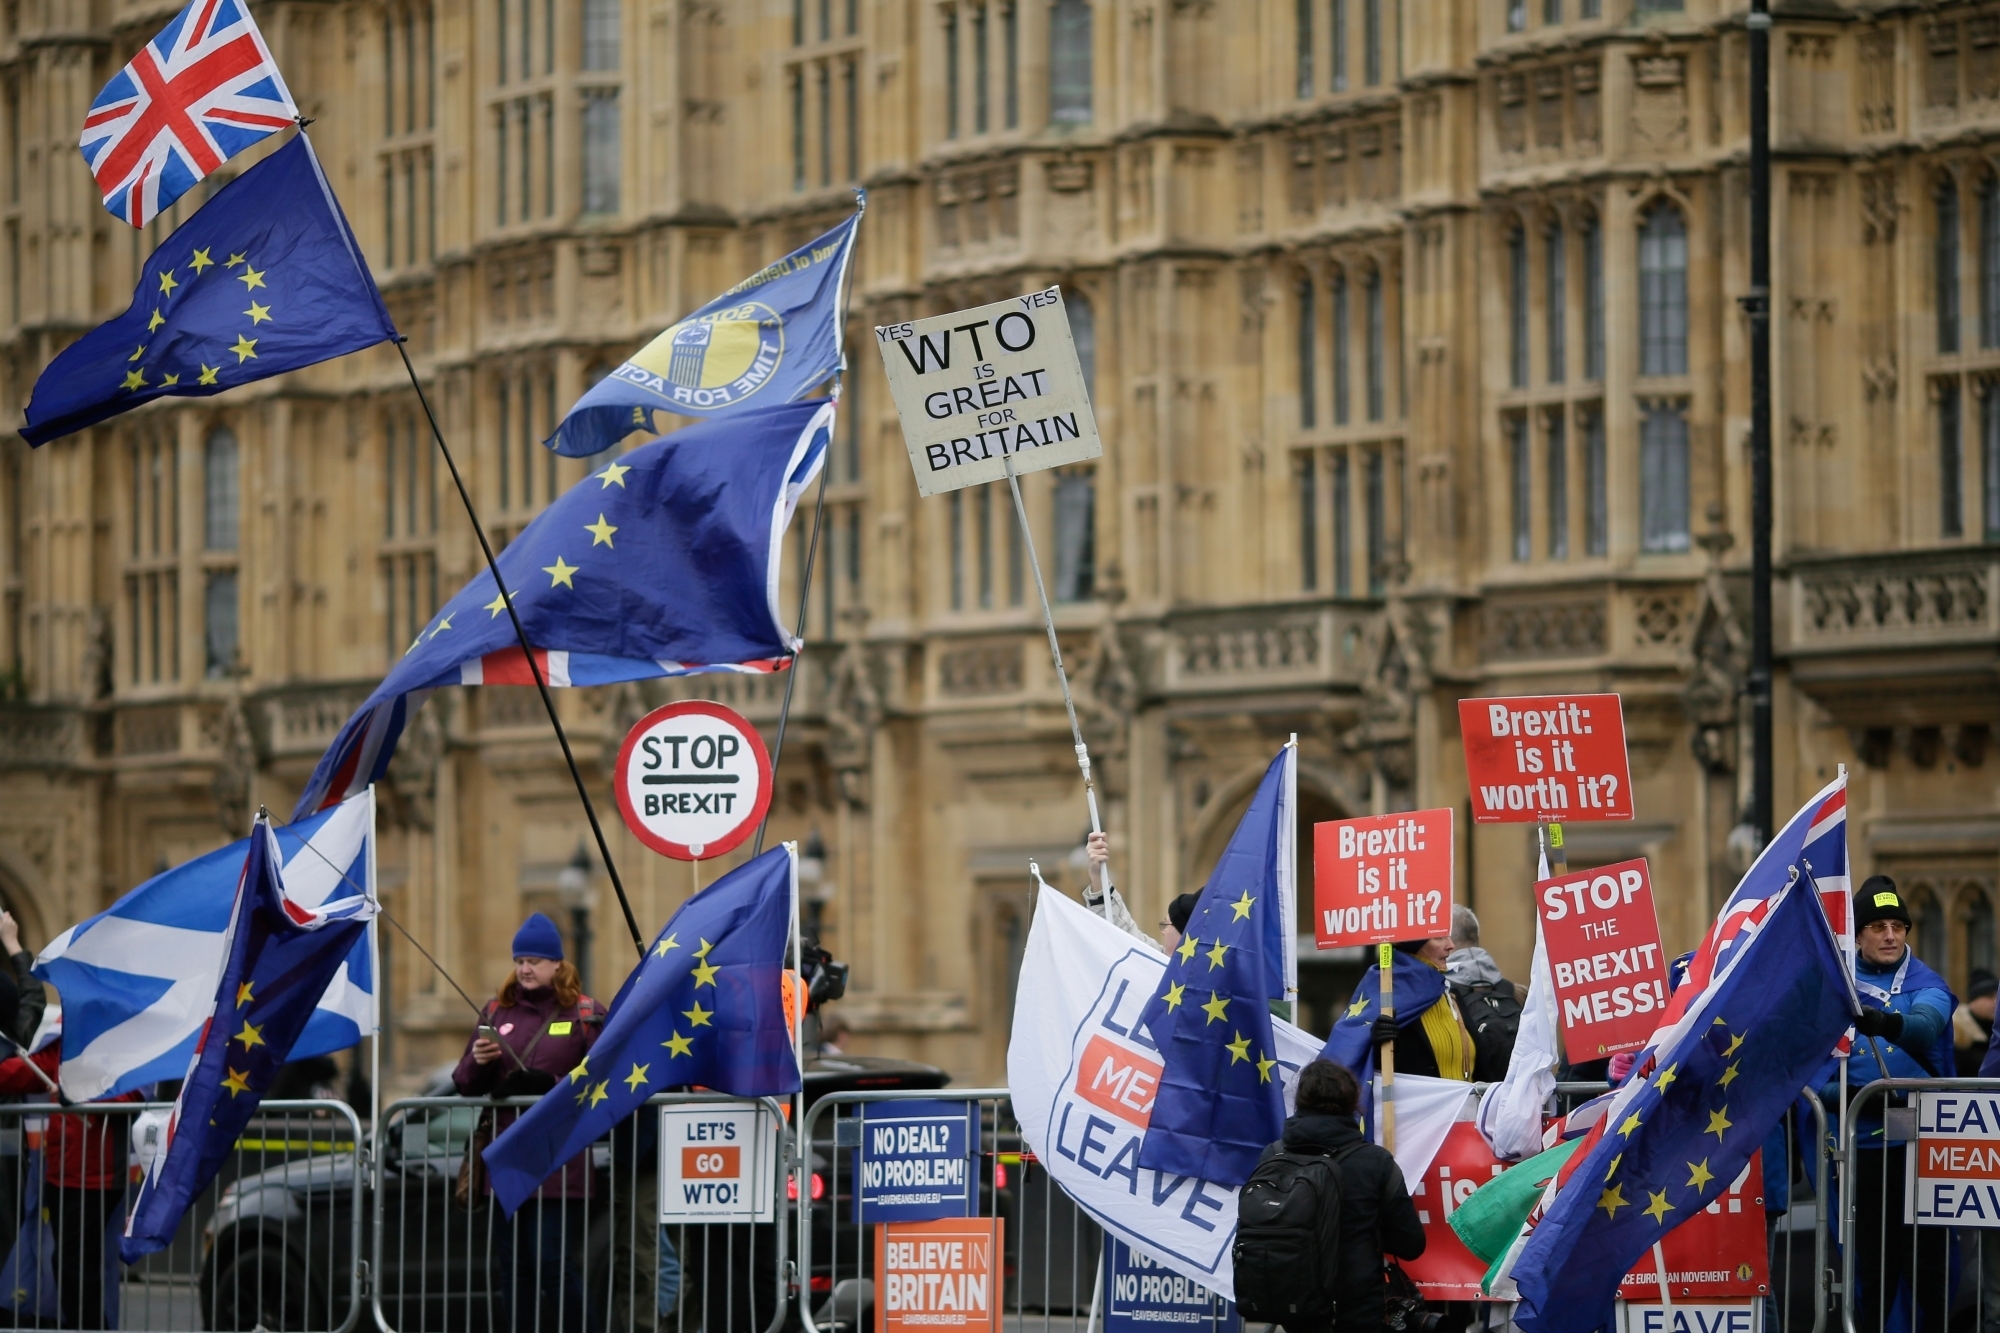 UPDATE 1-A Brexit crisis deepens, tens of thousands gather in London to demand new referendum